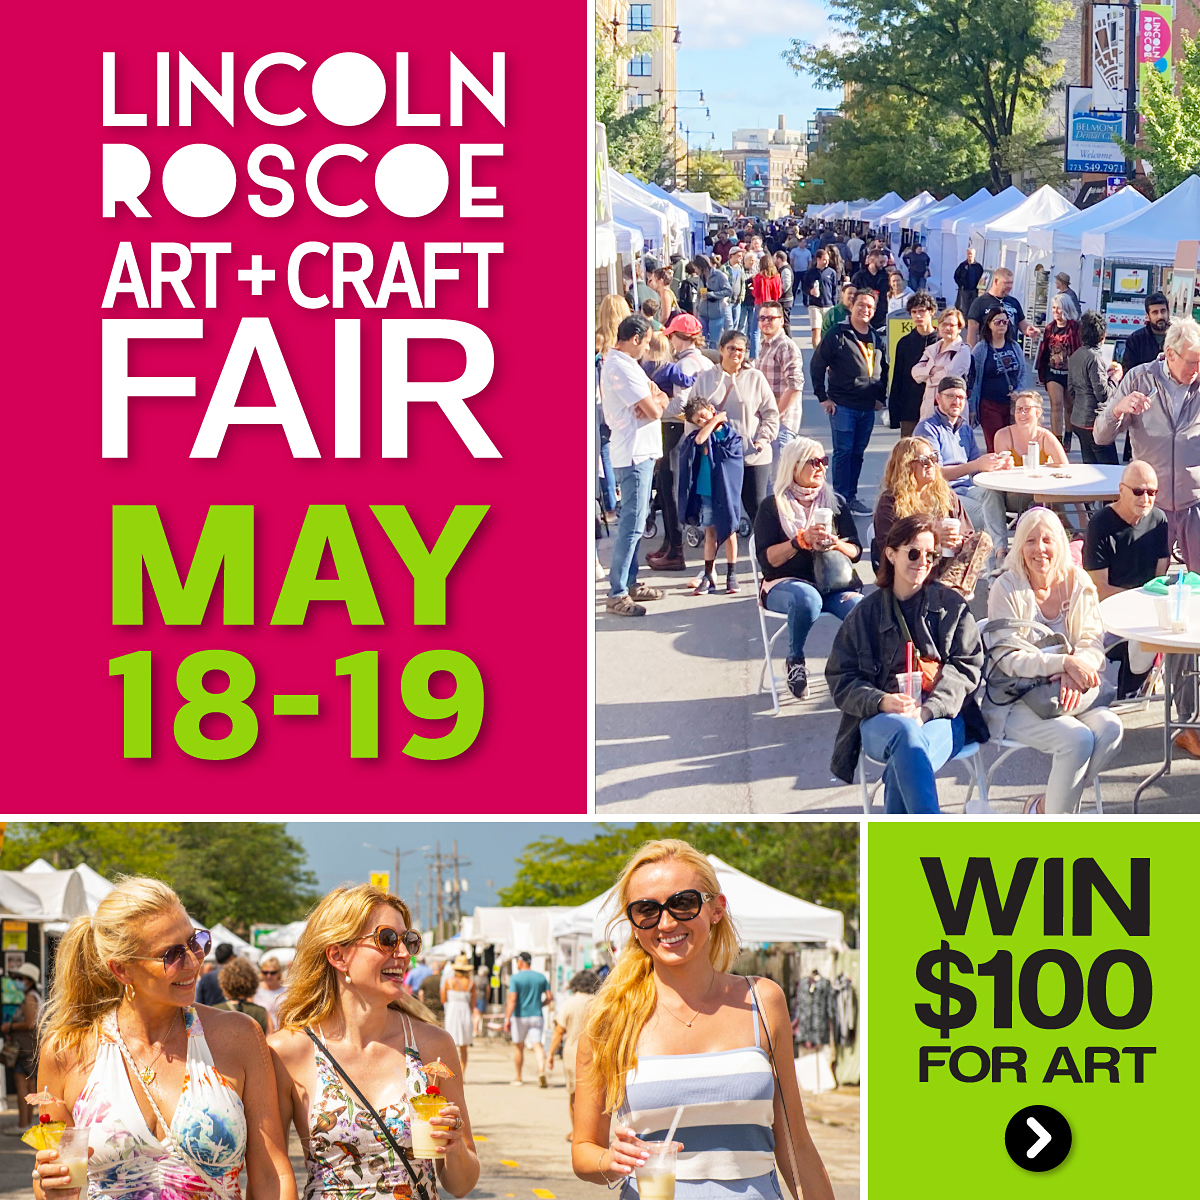 Returning to Chicago on May 18th & 19th, the Lincoln Roscoe Art and Craft Fair features art for the home, including fabulous paintings, sculptures, fiber pieces, décor, jewelry, and more, all handmade by artists and artisans. Enter to win a $100 gift card! t.dostuffmedia.com/t/c/s/139415